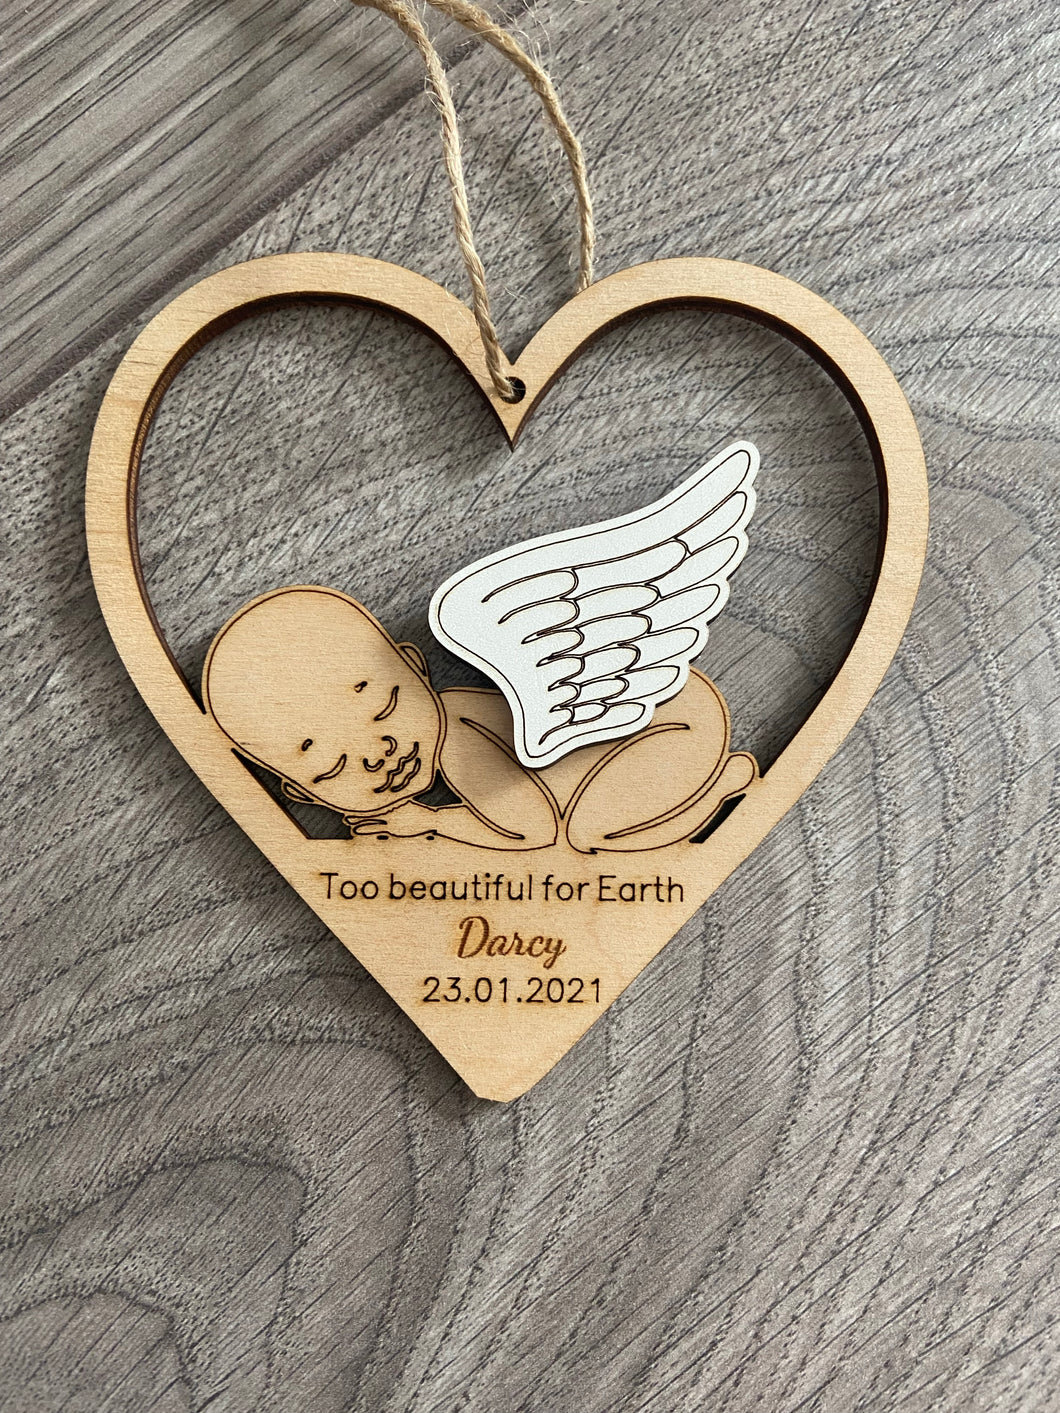 Too beautiful for Earth heart wings hanging plaque - Laser LLama Designs Ltd